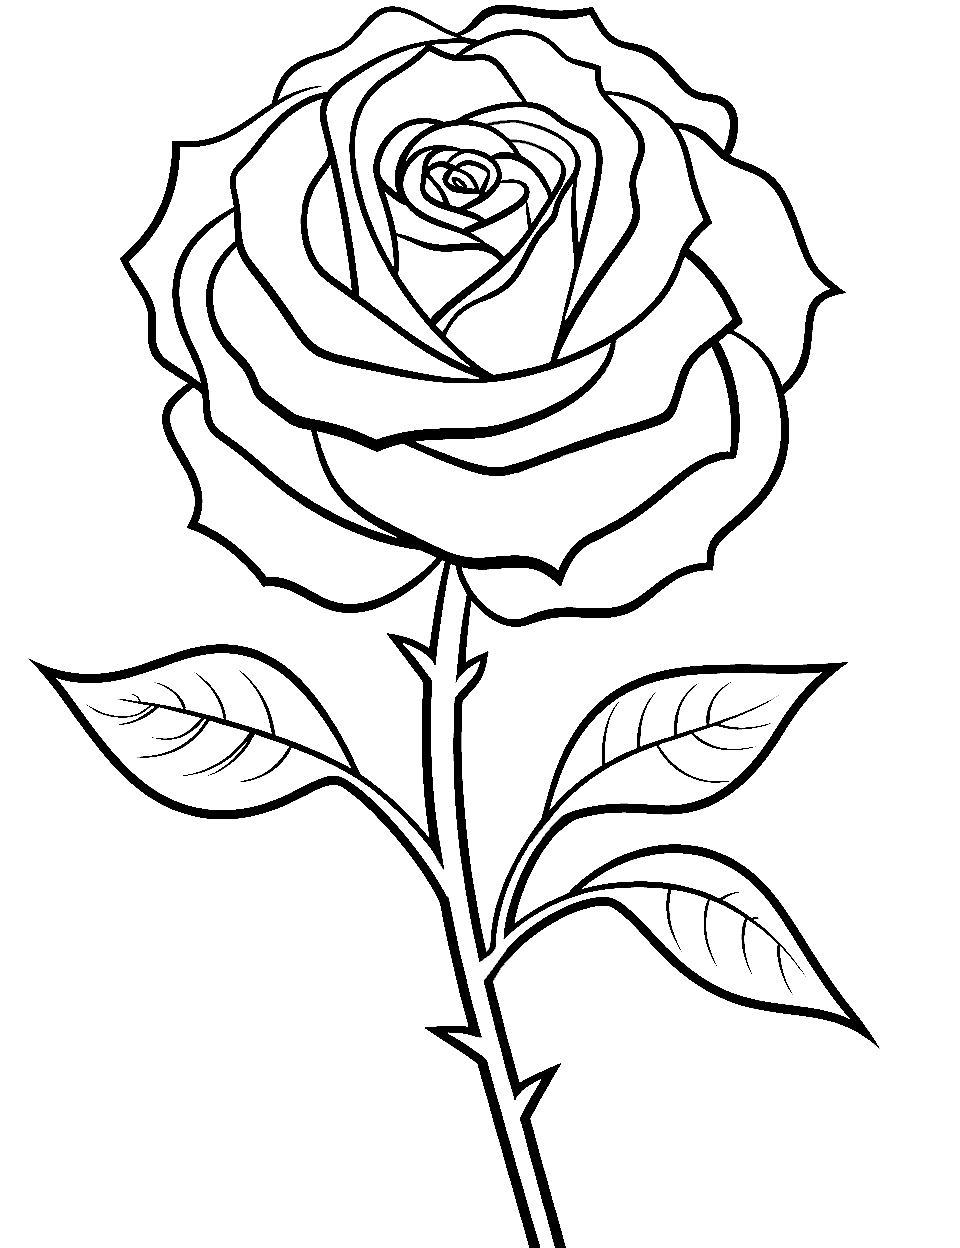 Roses Kids Coloring Books : A Simple Coloring Book for Kids and